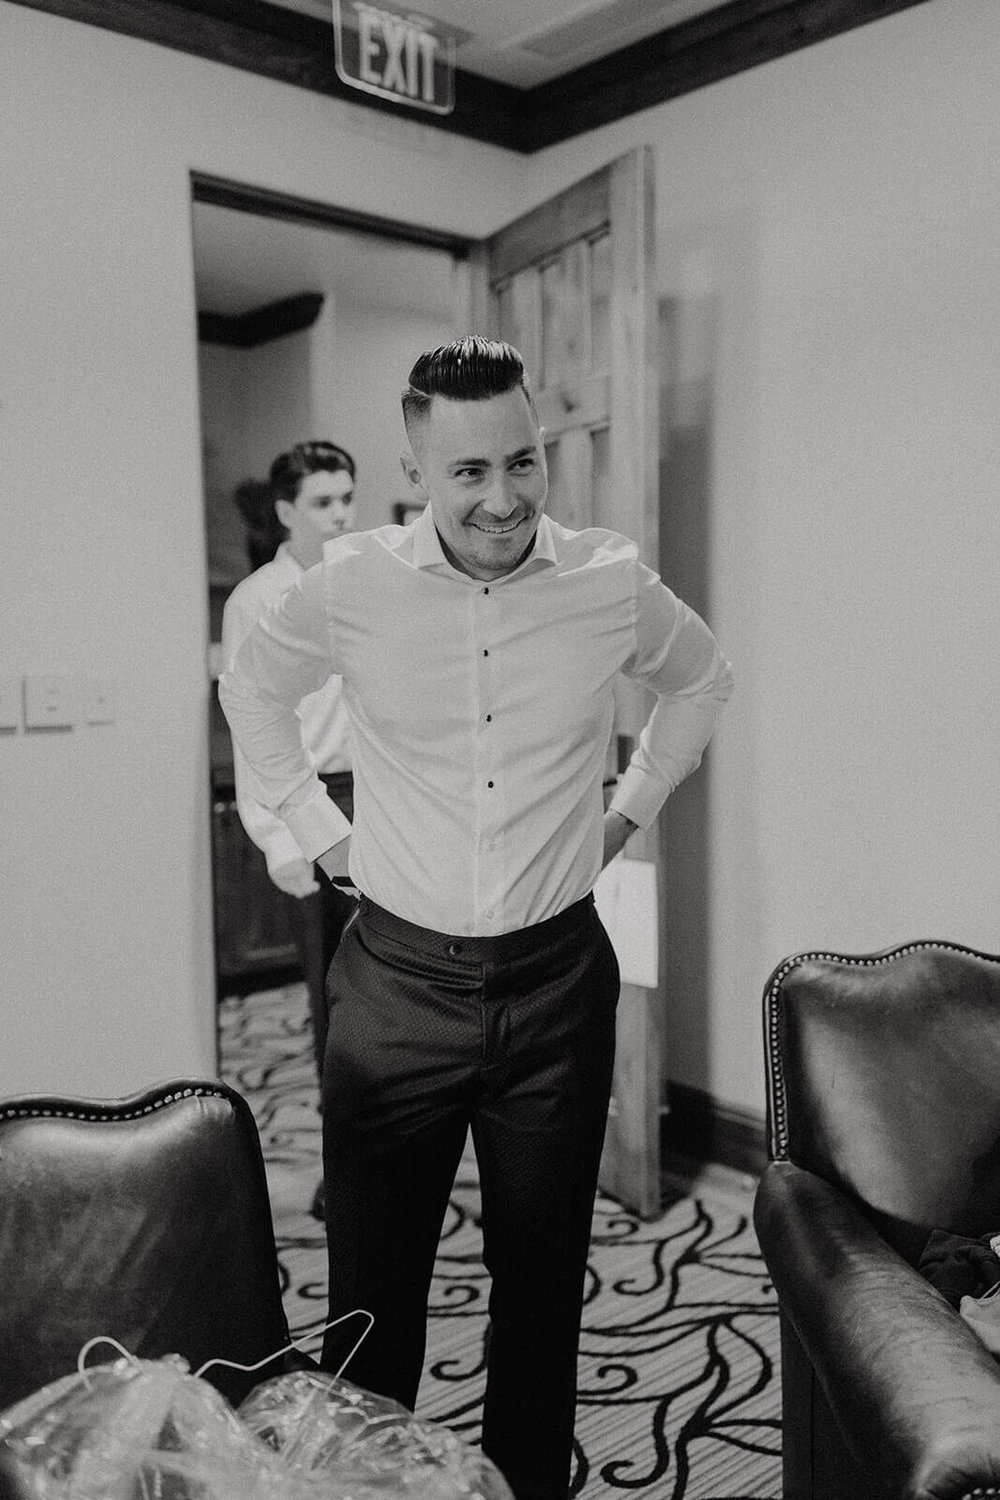 Black and white photo of groom getting ready for wedding